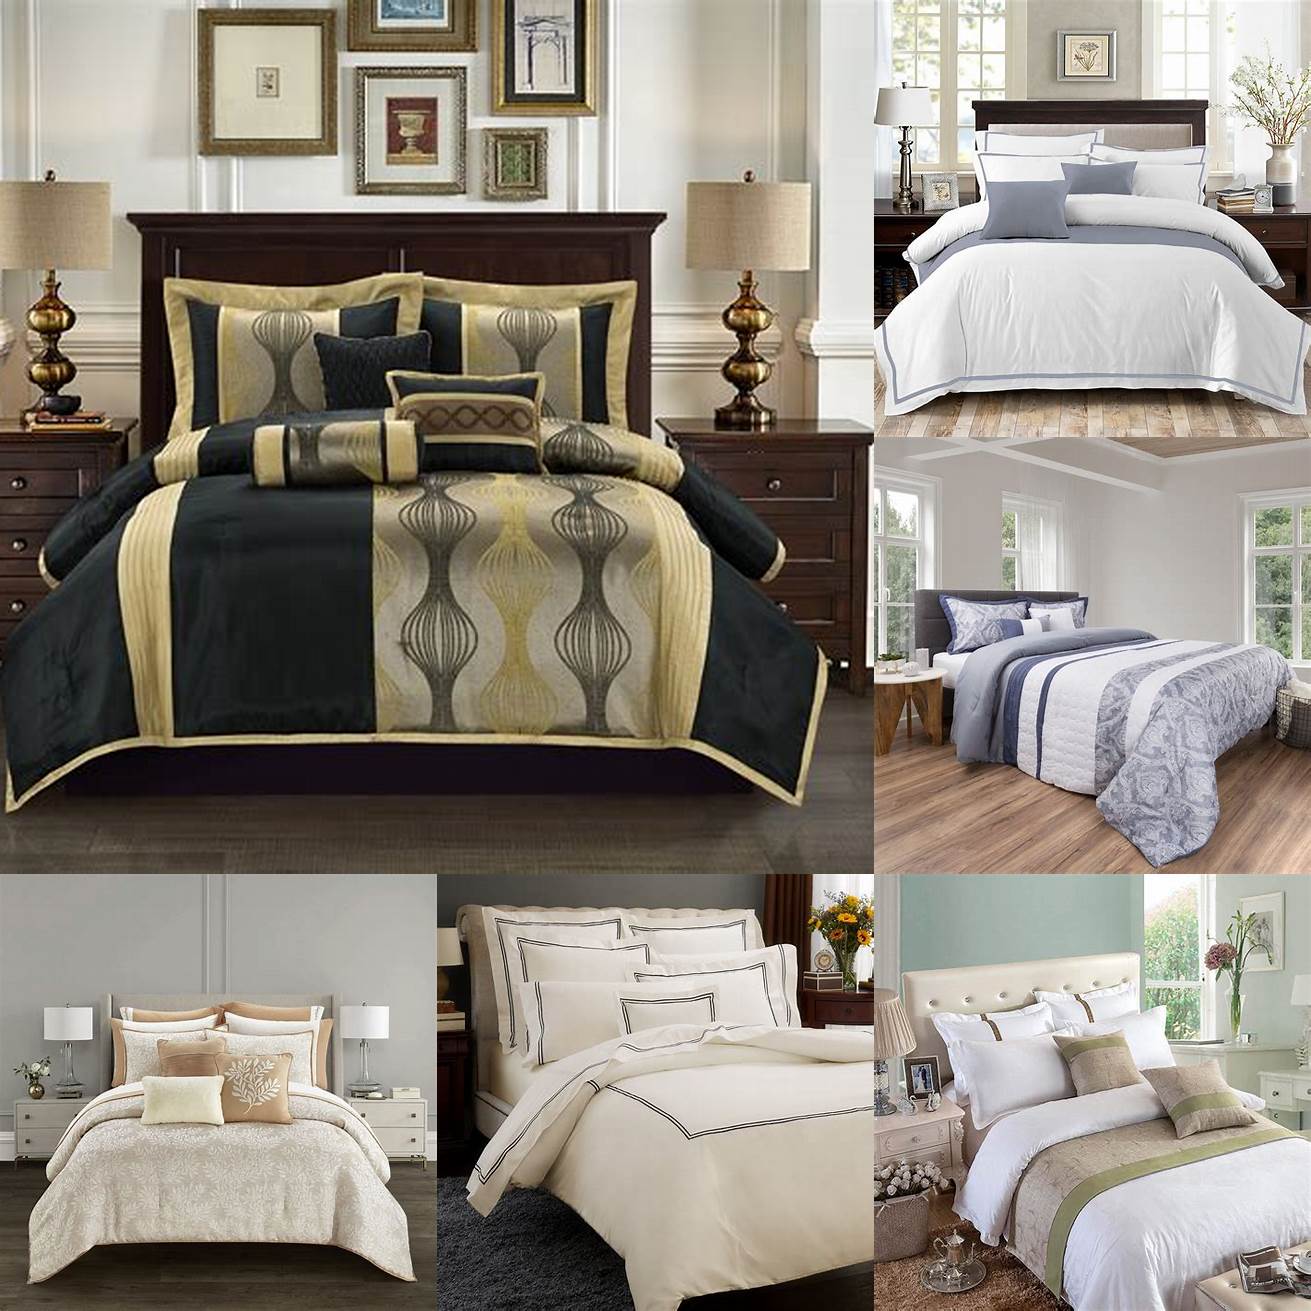 Invest in quality bedding and linens